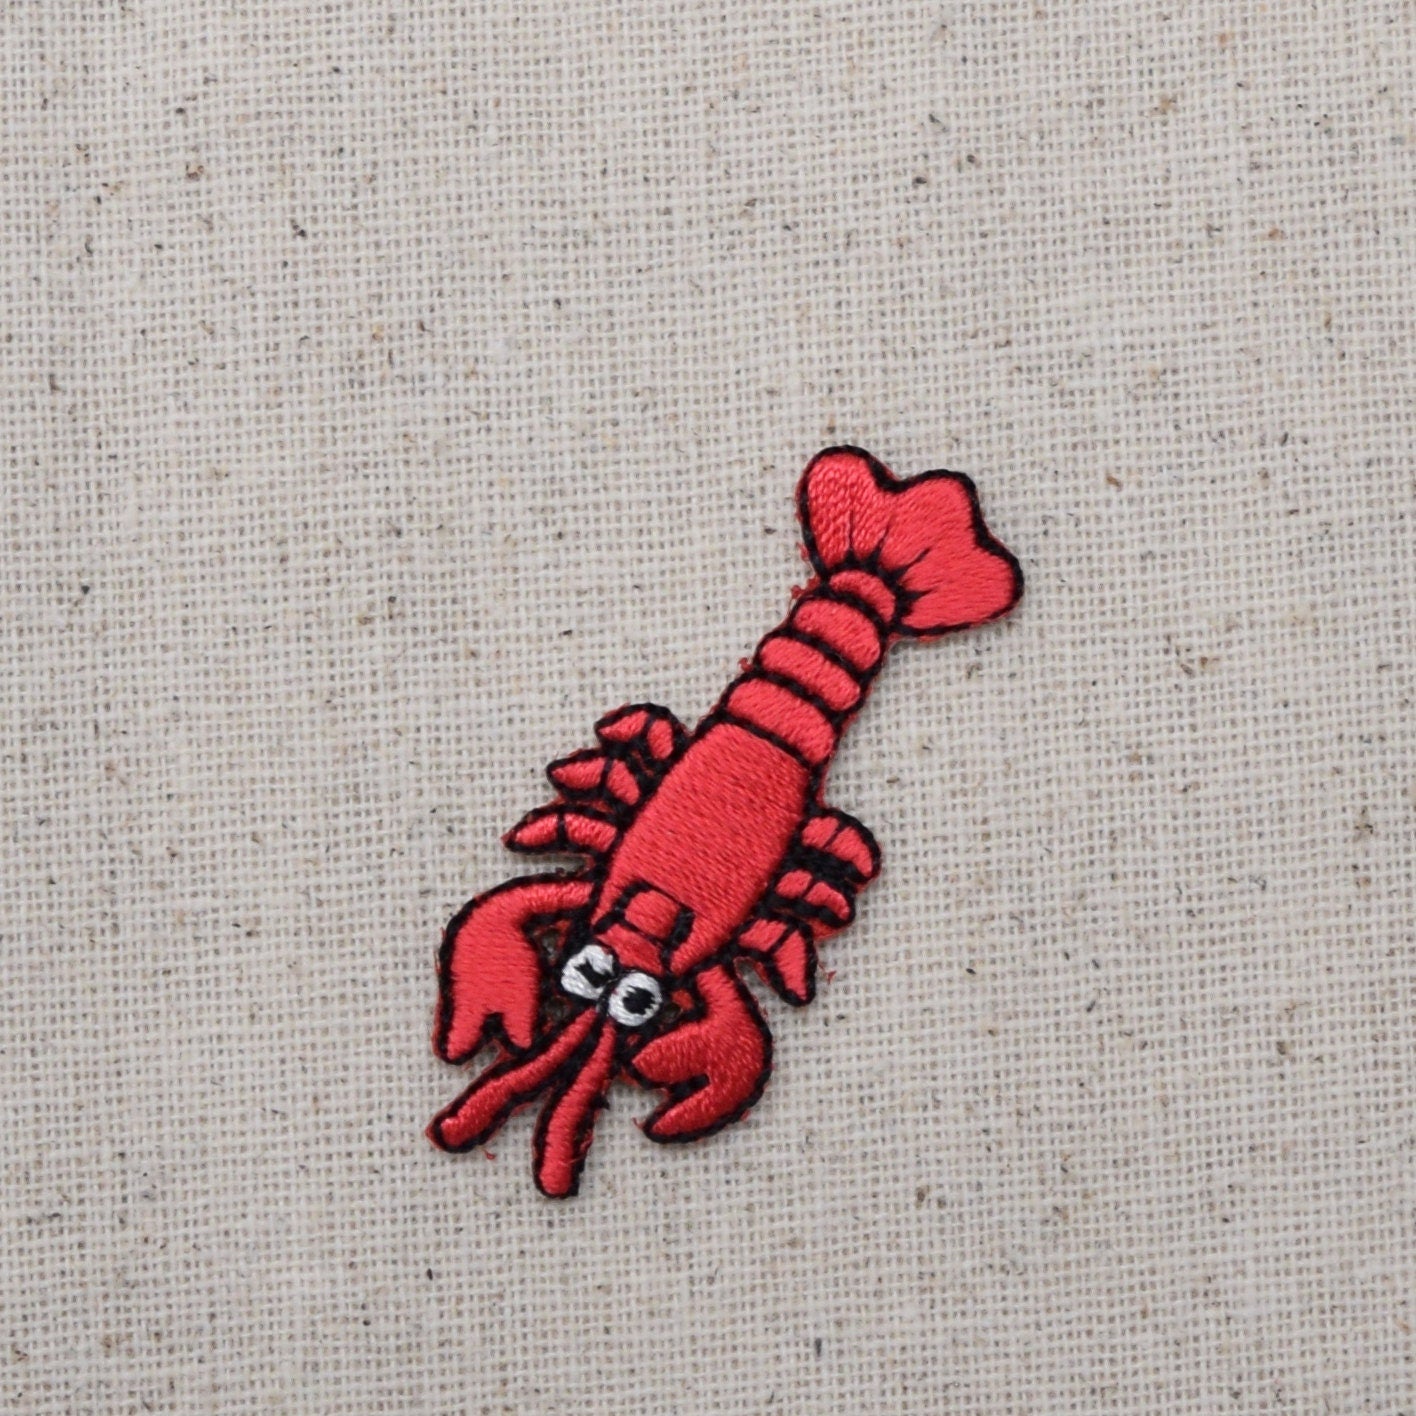 Red Lobster - Crawfish - Iron on Applique - Embroidered Patch - WA106